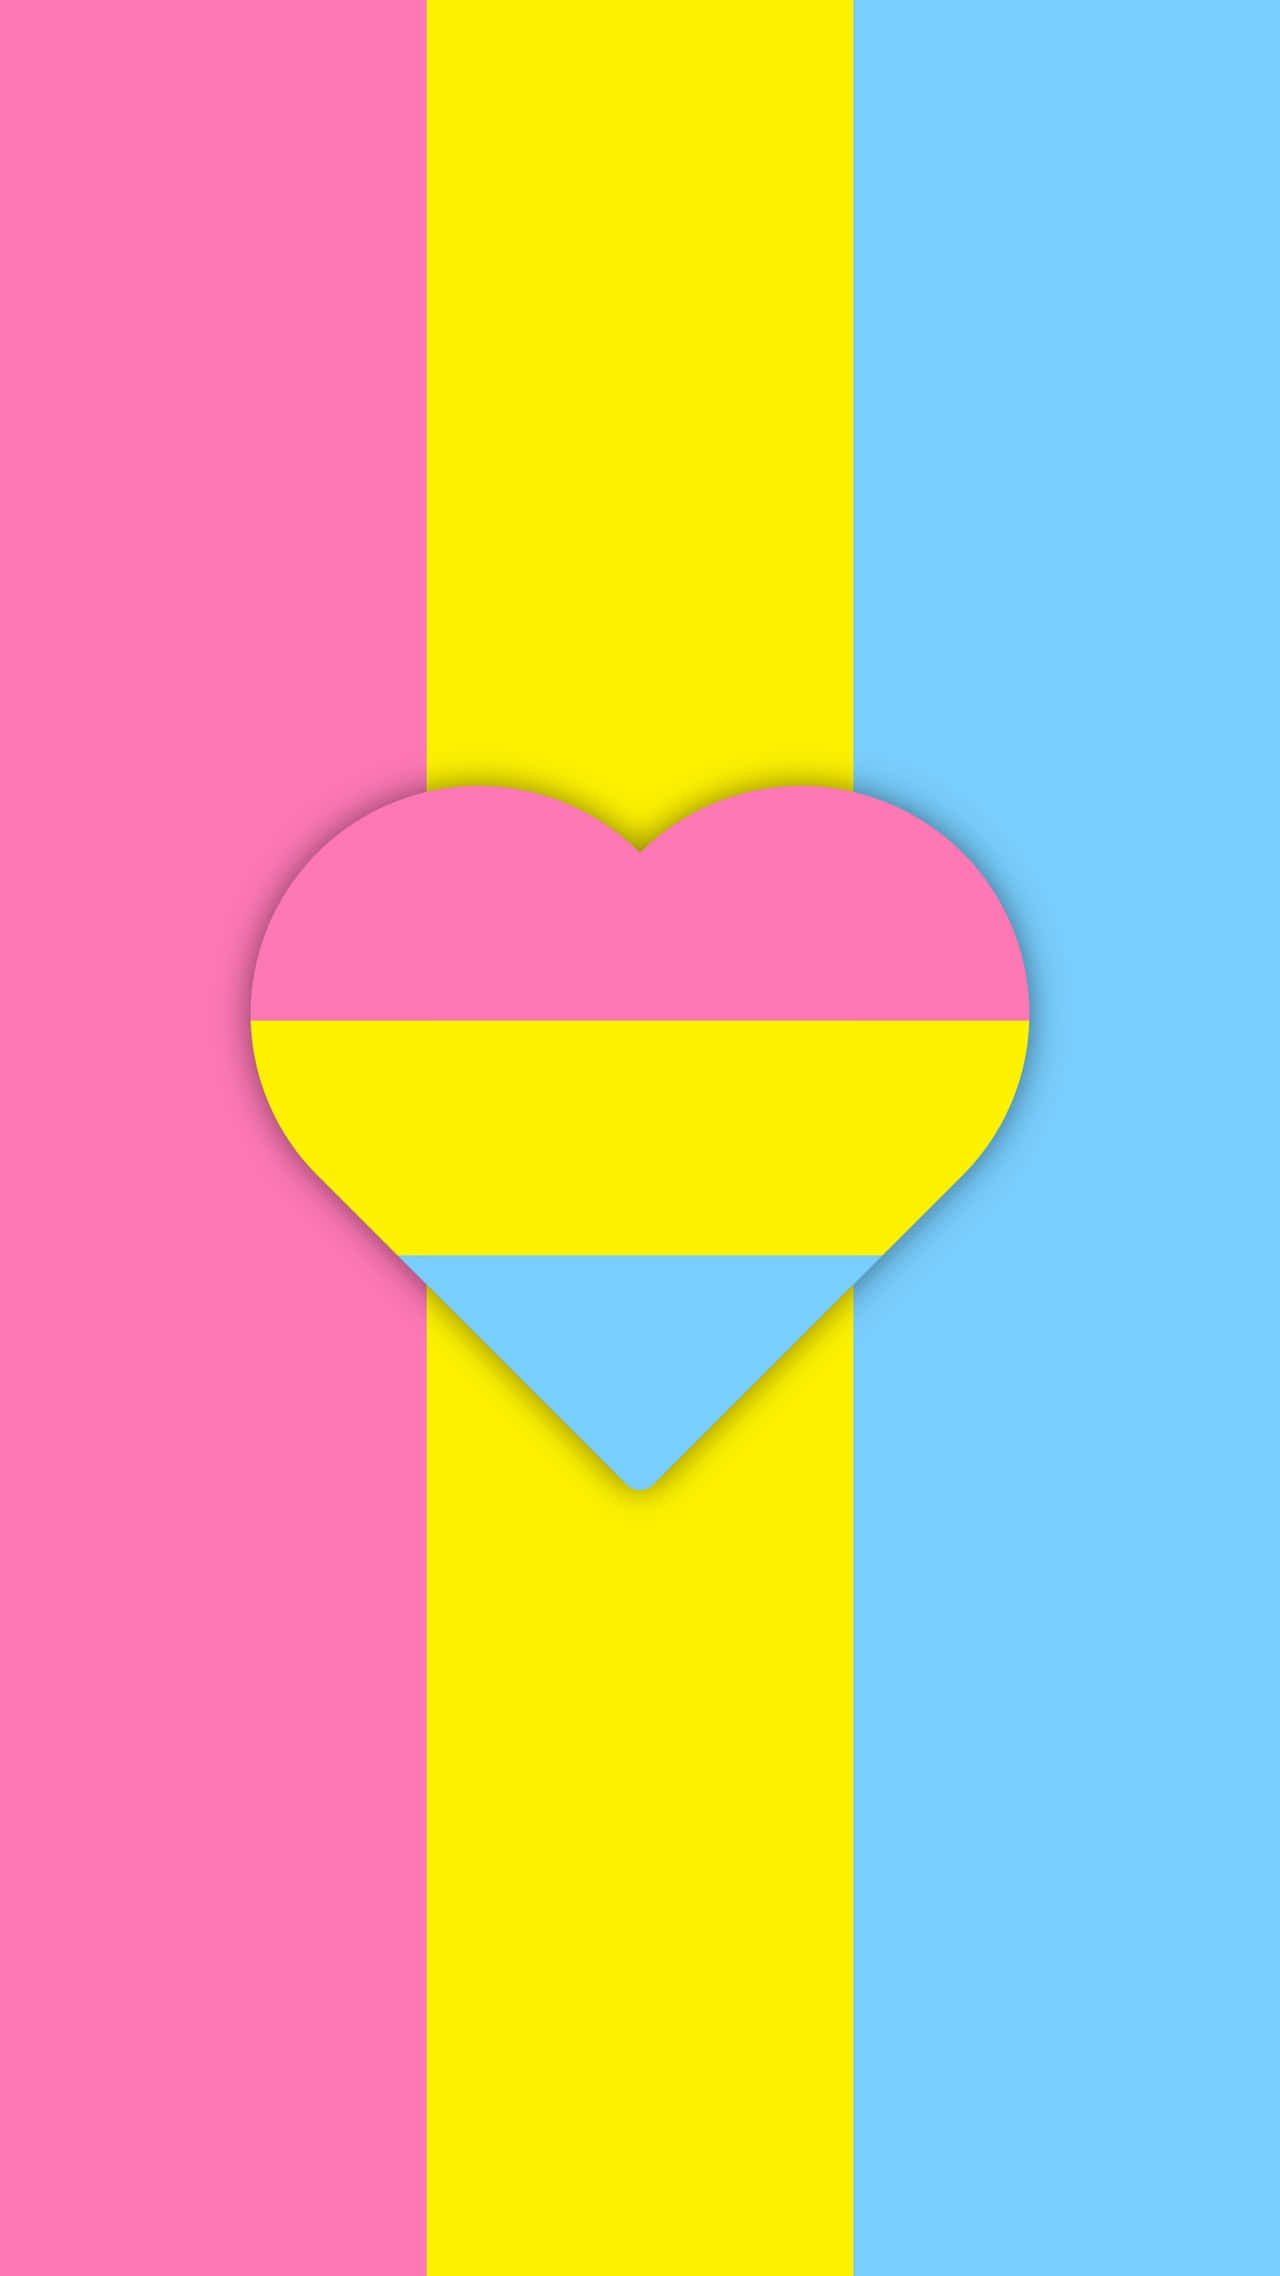 A Heart Shaped Flag With The Colors Of The Transgender Flag